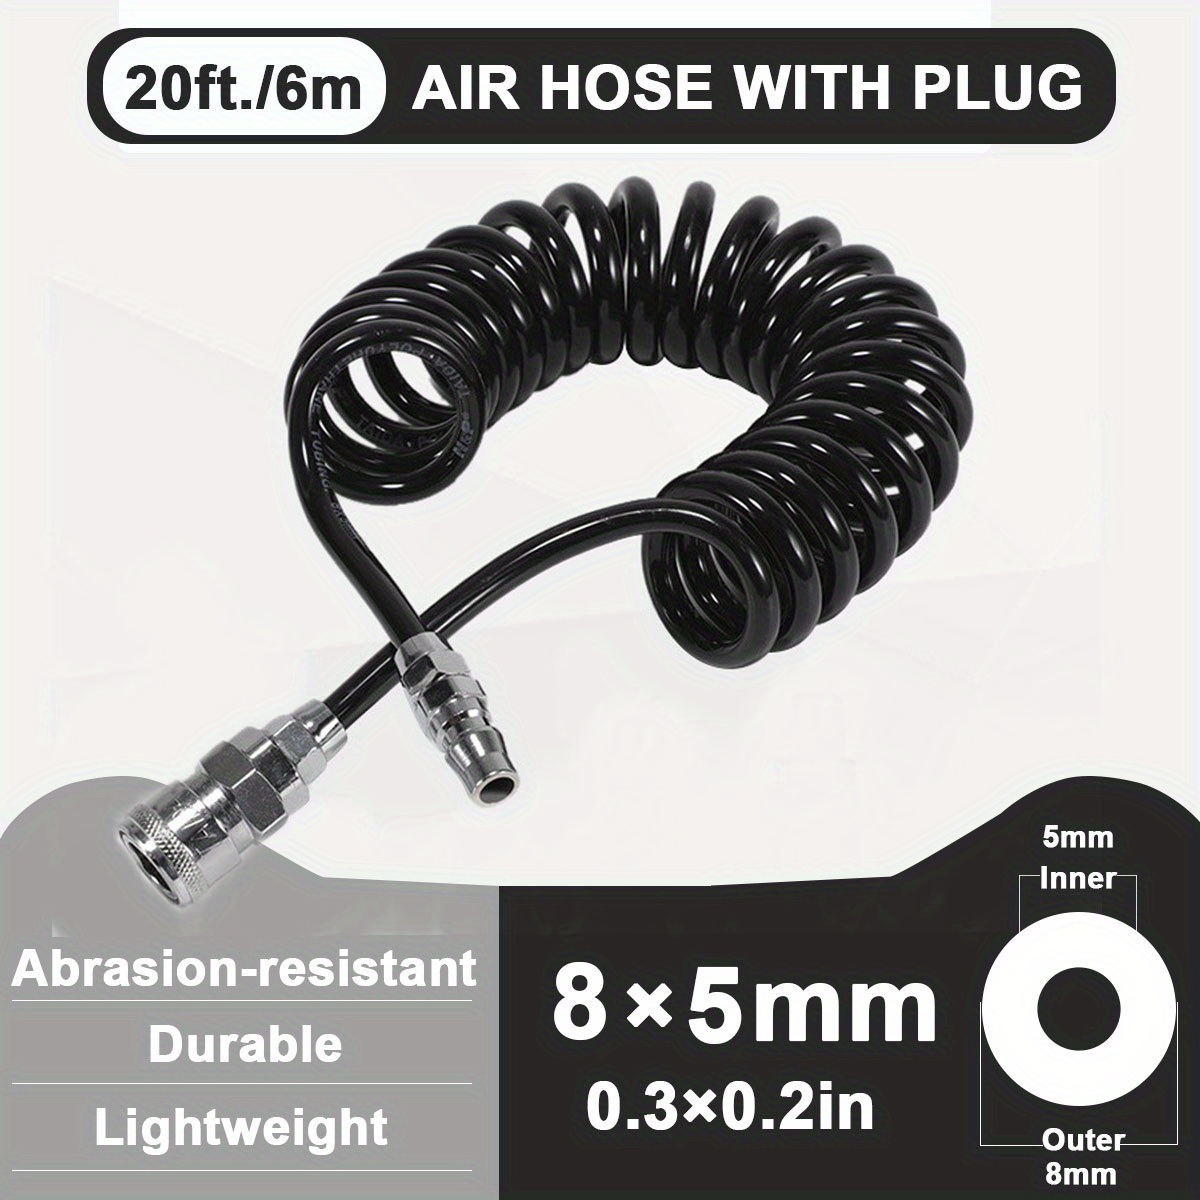 6 Foot Polyurethane Plastic Airbrush Hose with Standard 1/8 Size Fittings  on Both Ends 